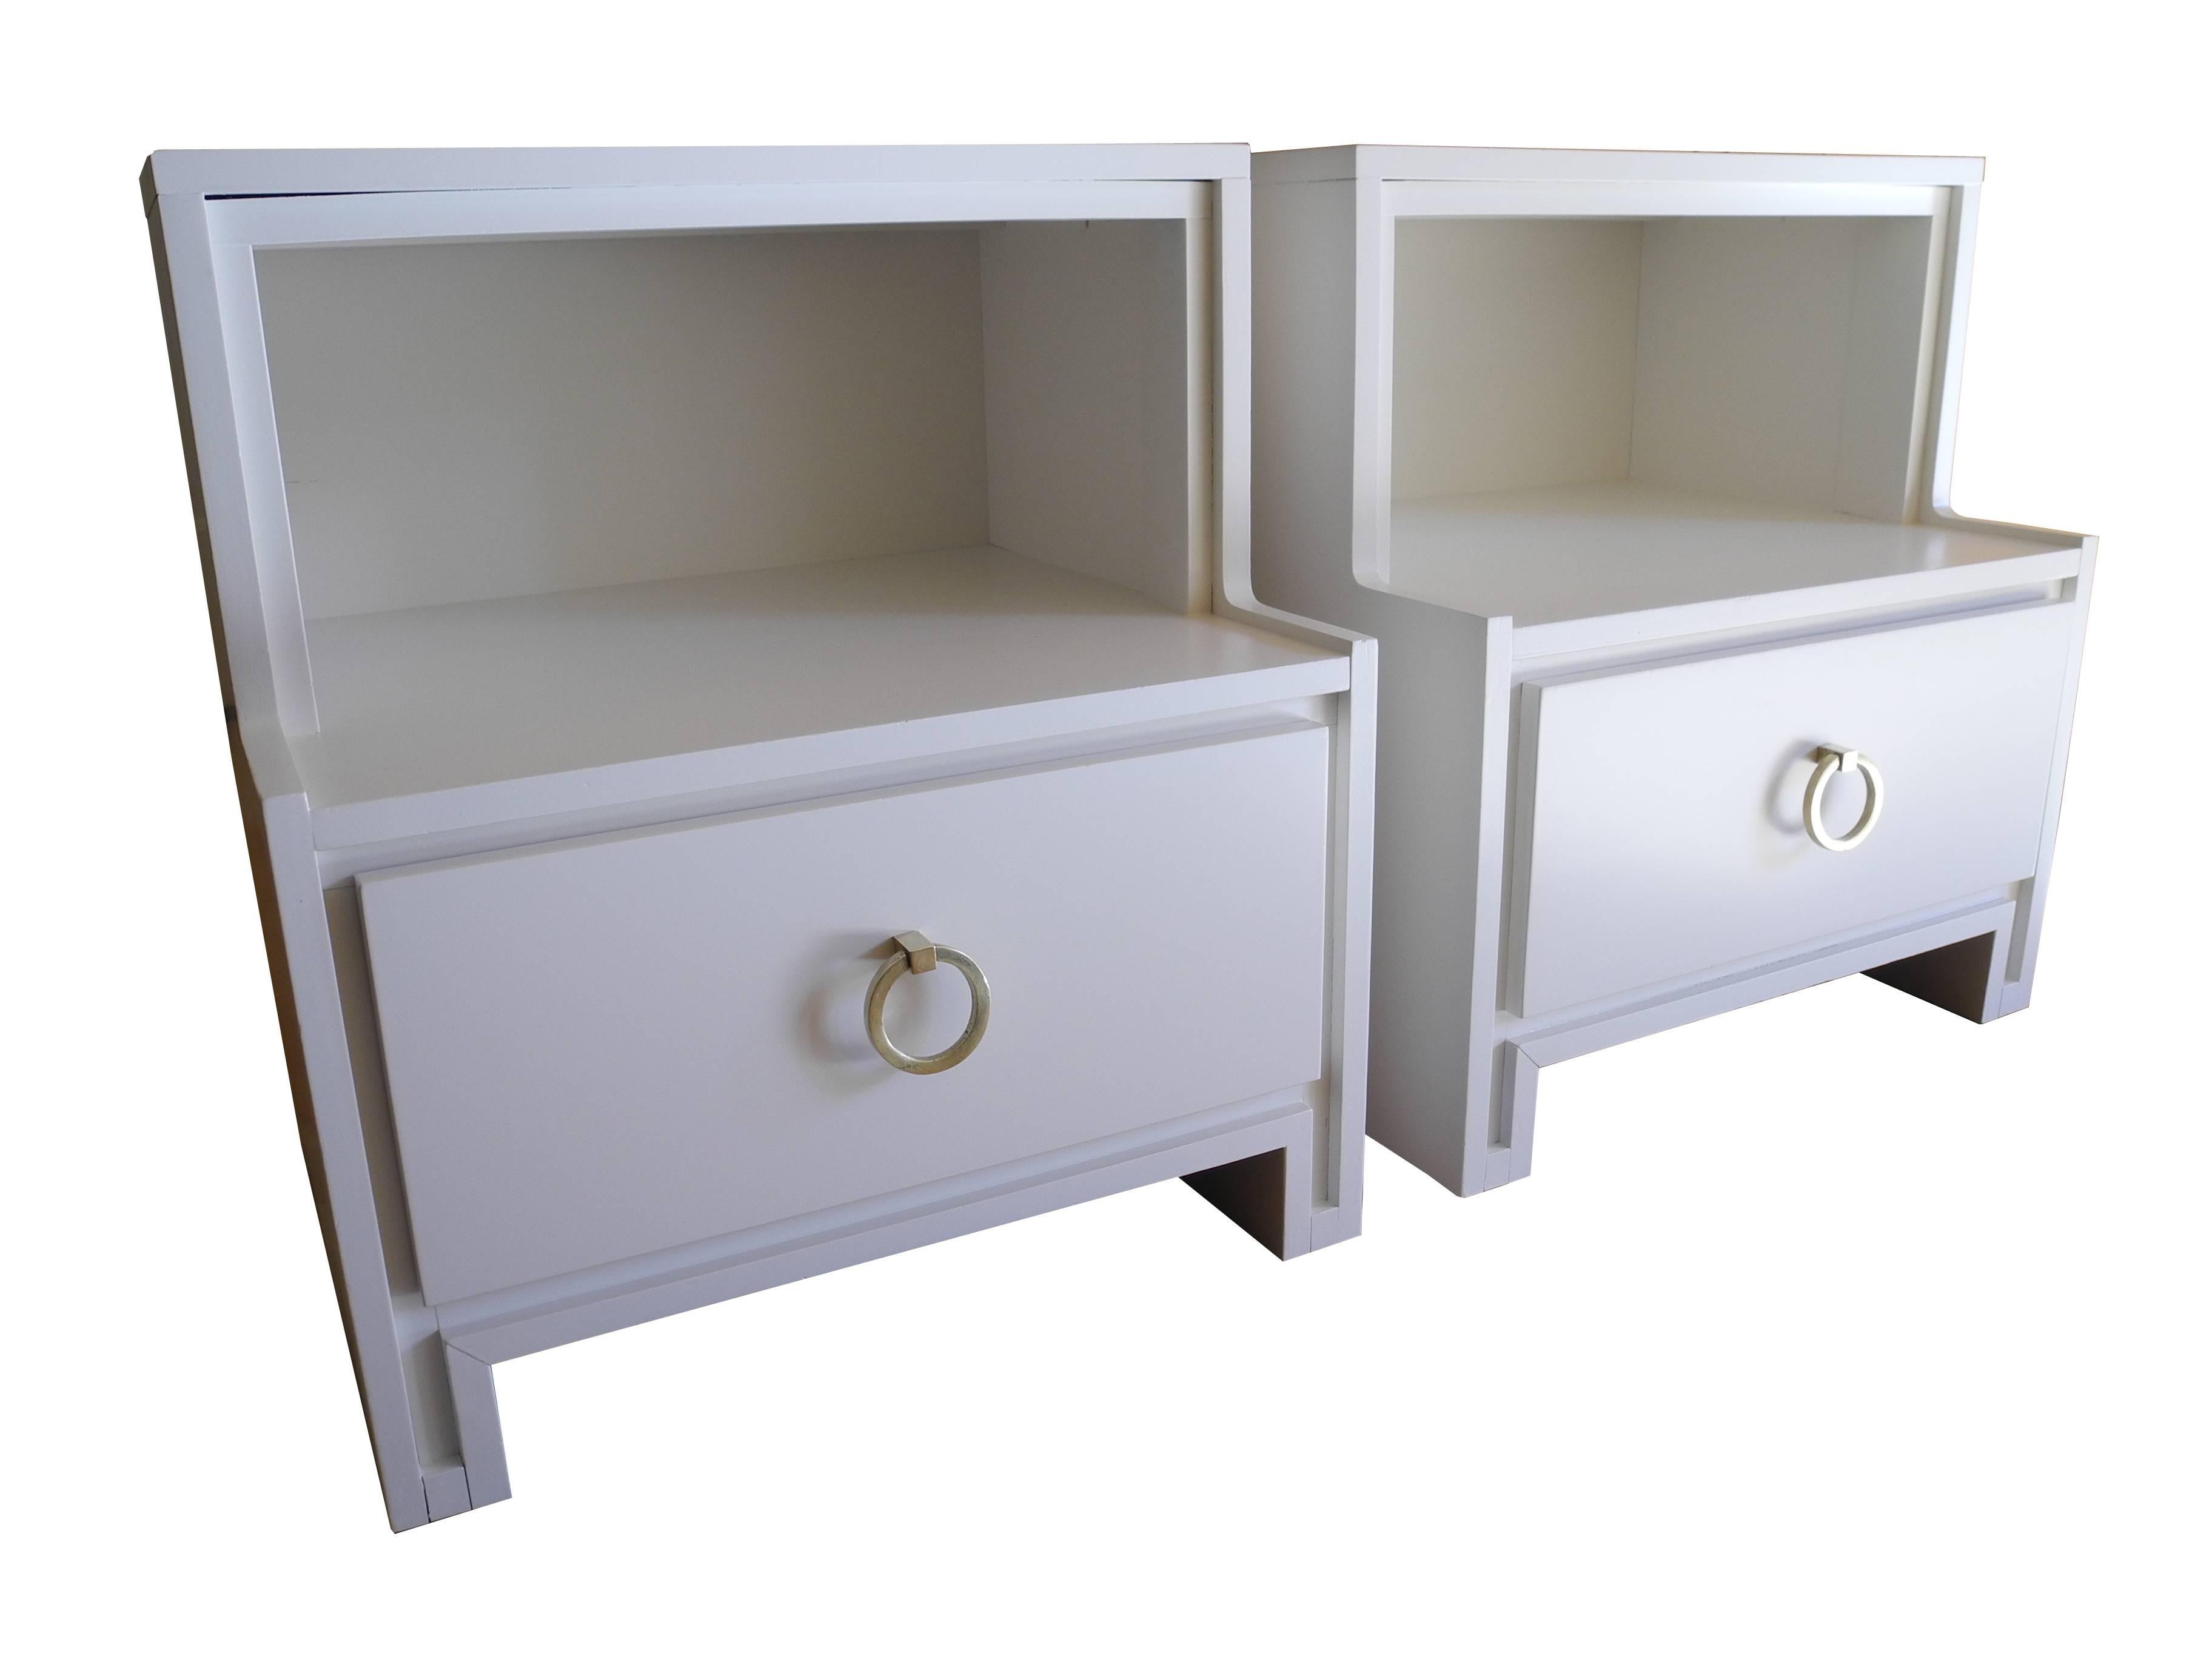 These bedside tables each have a deep drawer and are painted in linen white and lacquered. The bottom is 18